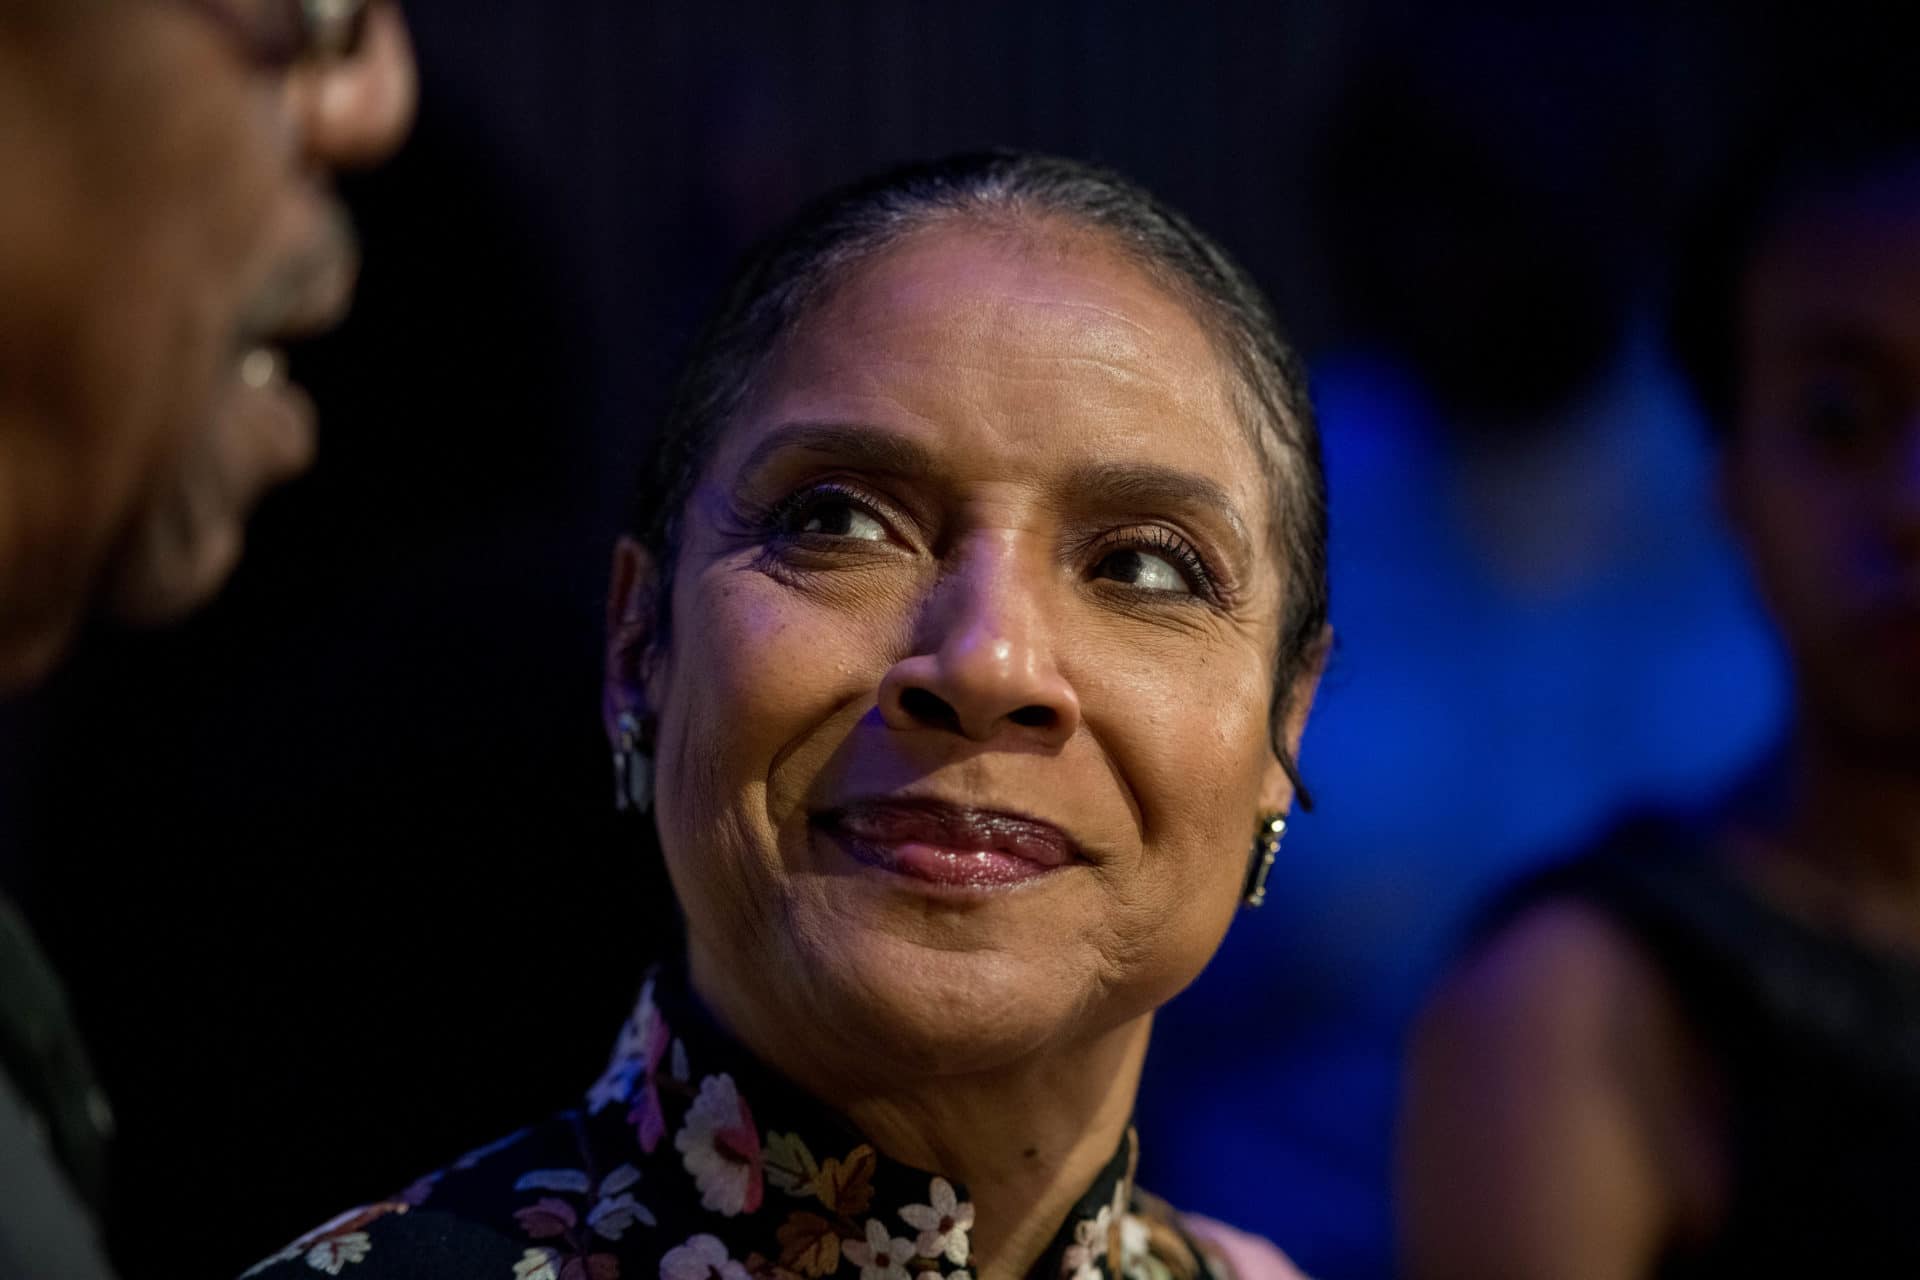 Phylicia Rashad To Make Broadway Directorial Debut With 'Blue'